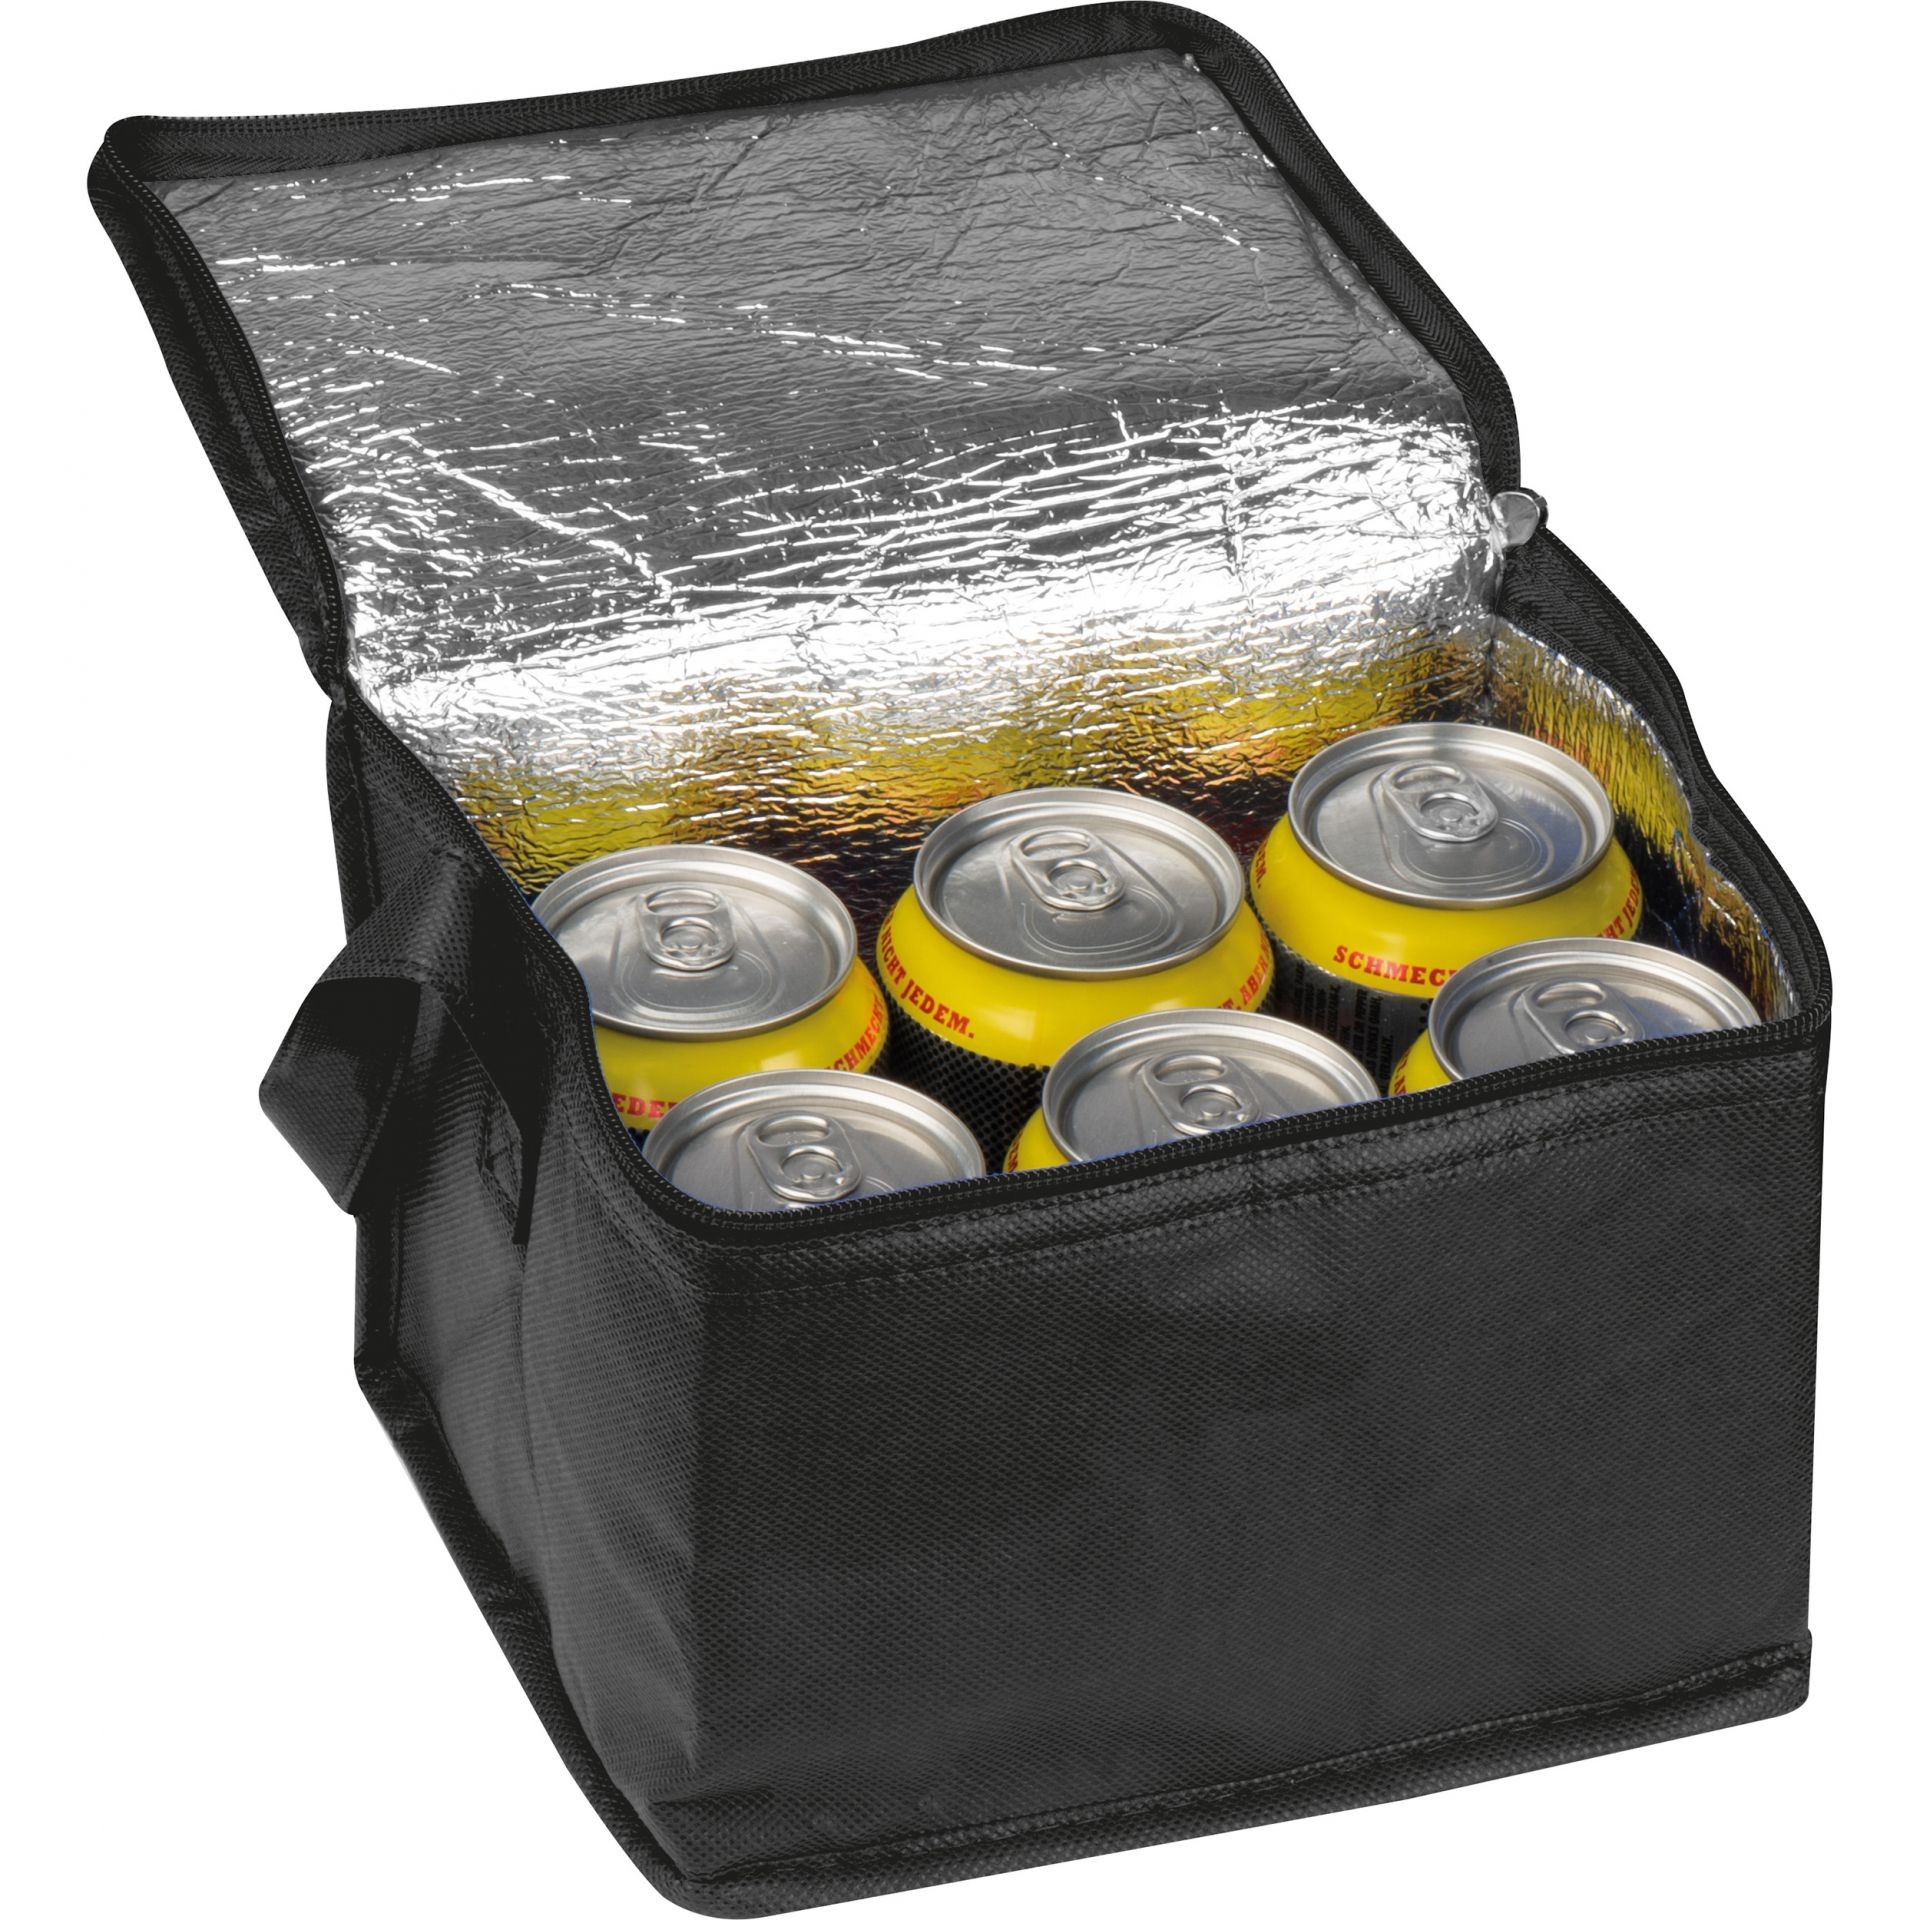 Non-woven cooling bag - 6 Cans